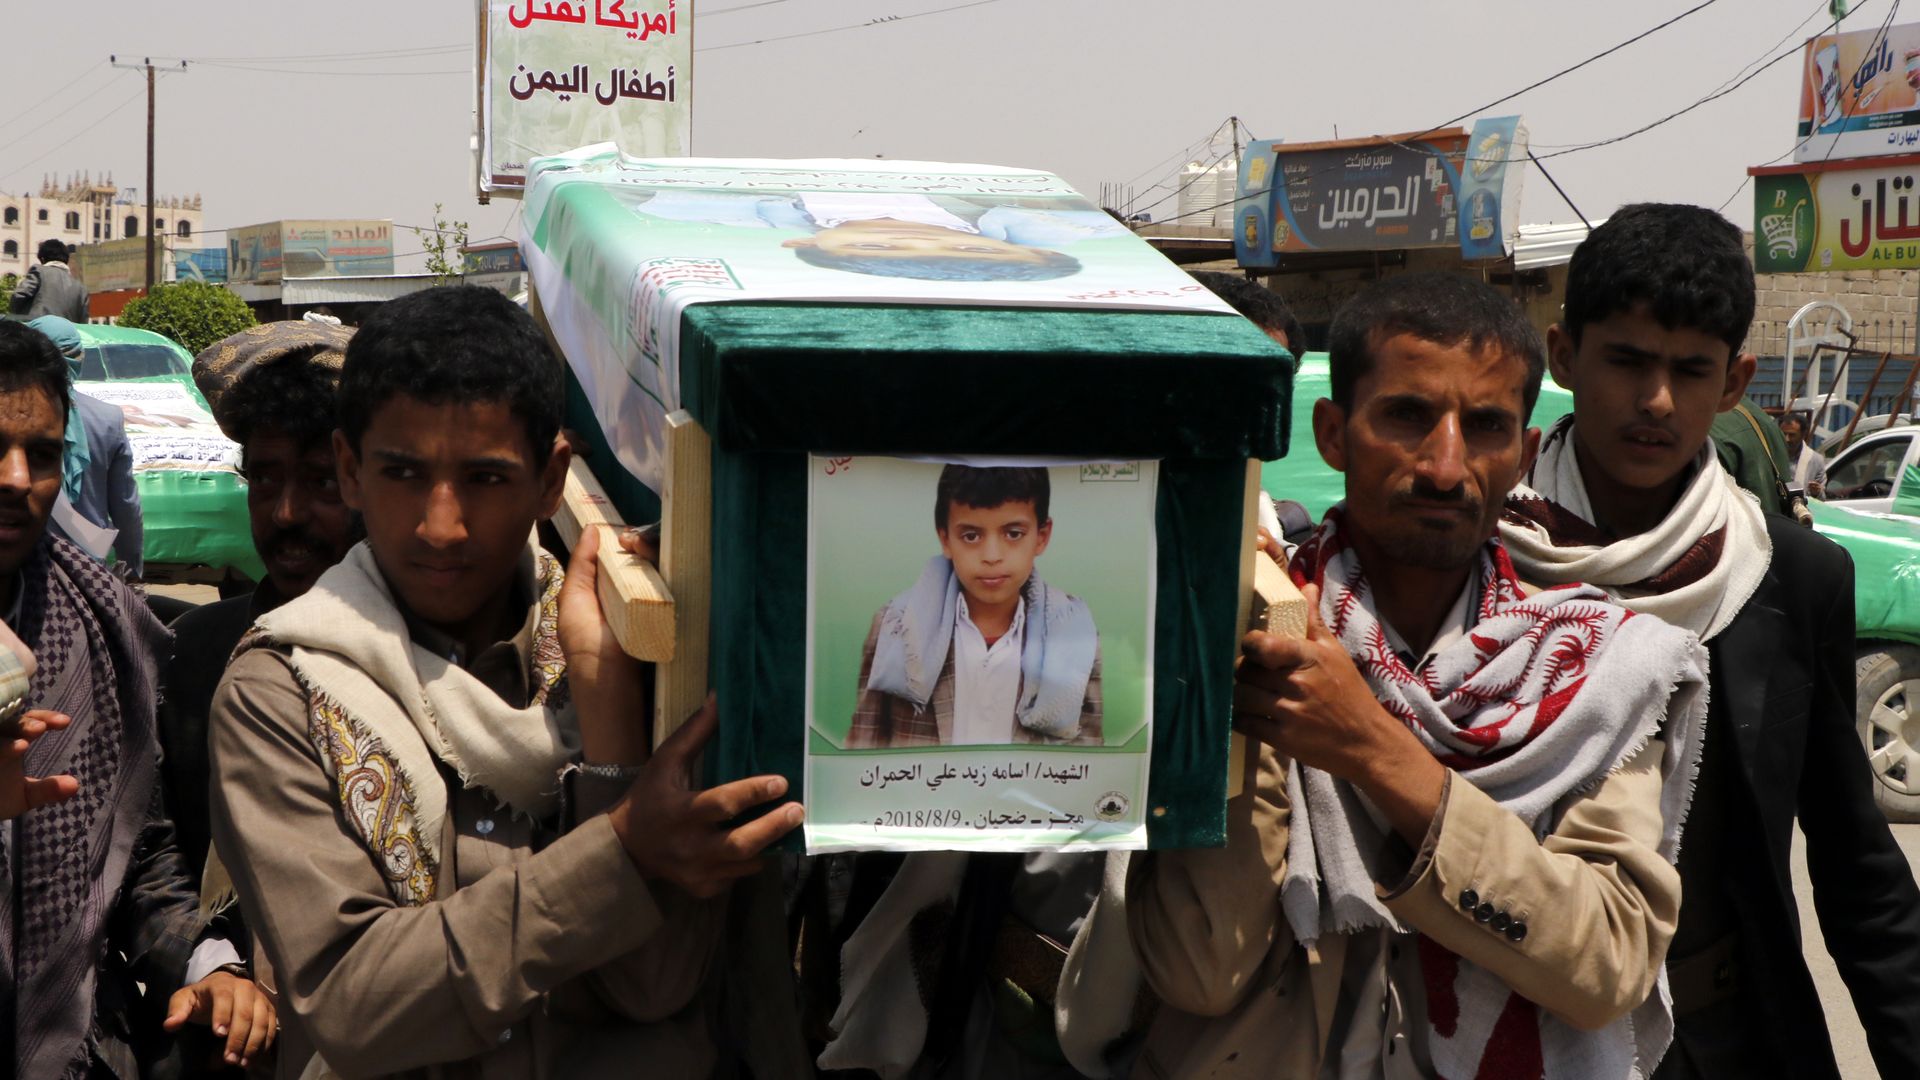 Men carry a coffin with the picture of a child on the front of it.